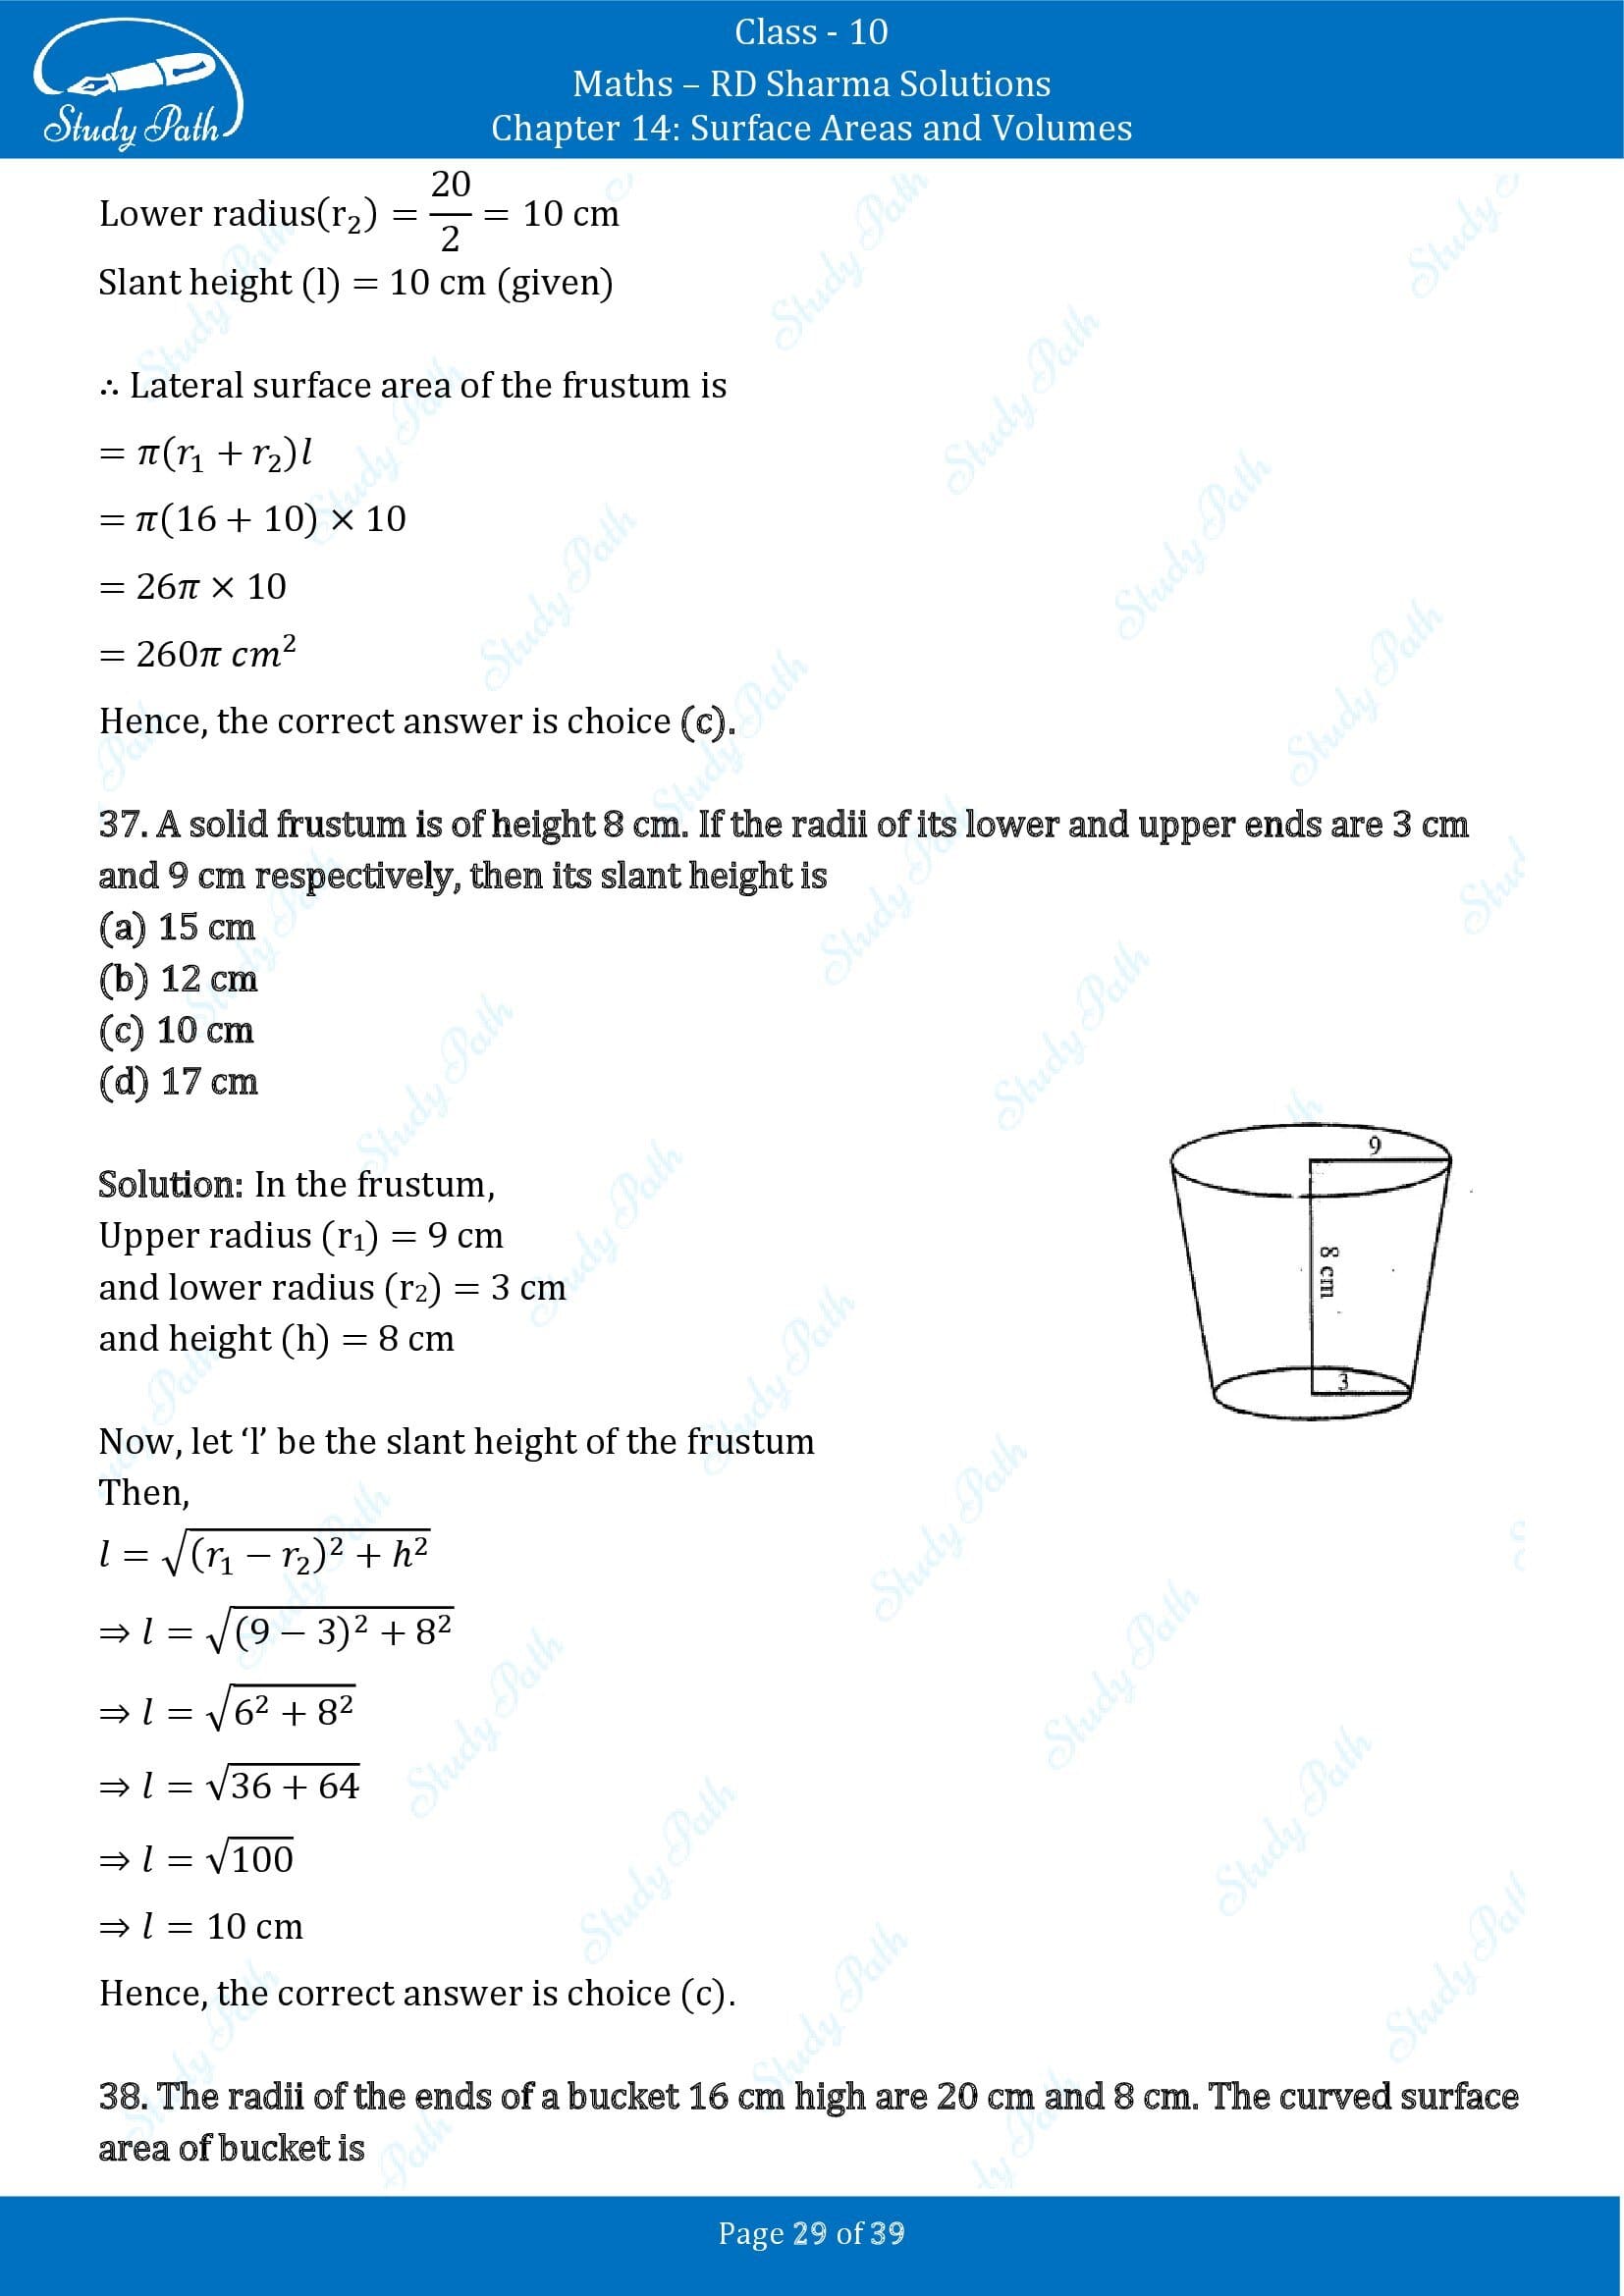 RD Sharma Solutions Class 10 Chapter 14 Surface Areas and Volumes Multiple Choice Question MCQs 00029